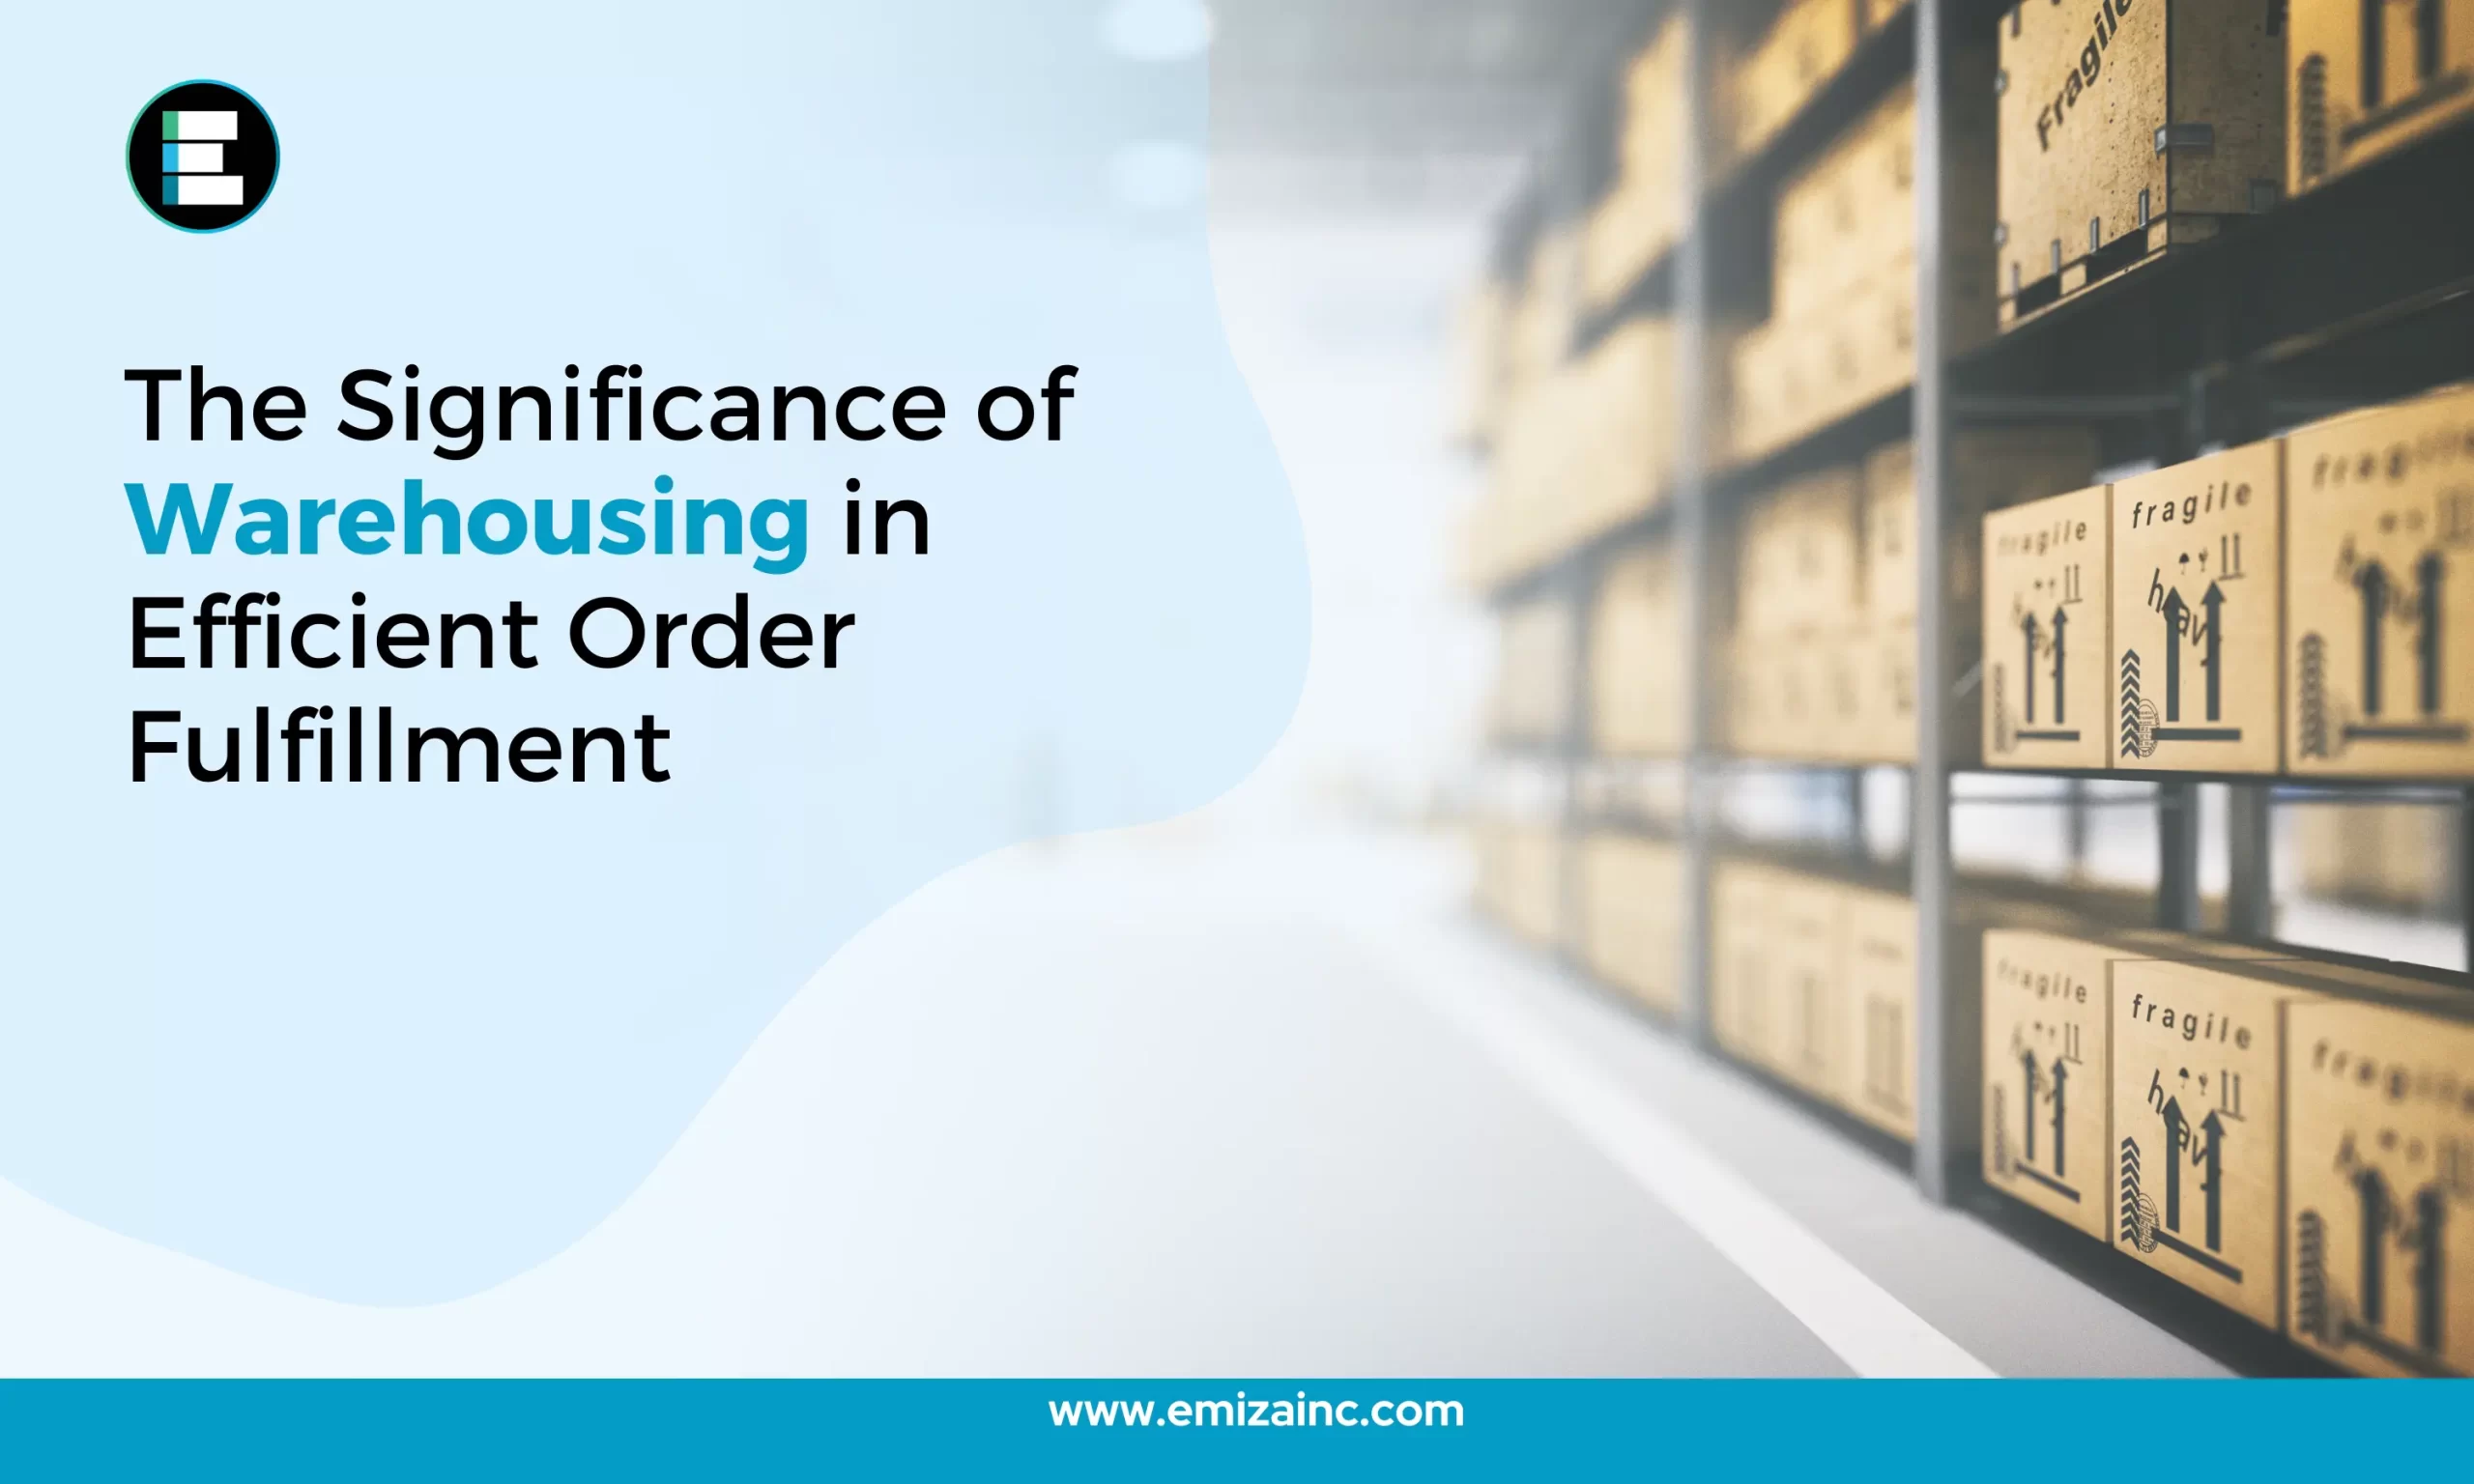 The Significance of Warehousing in Efficient Order Fulfillment